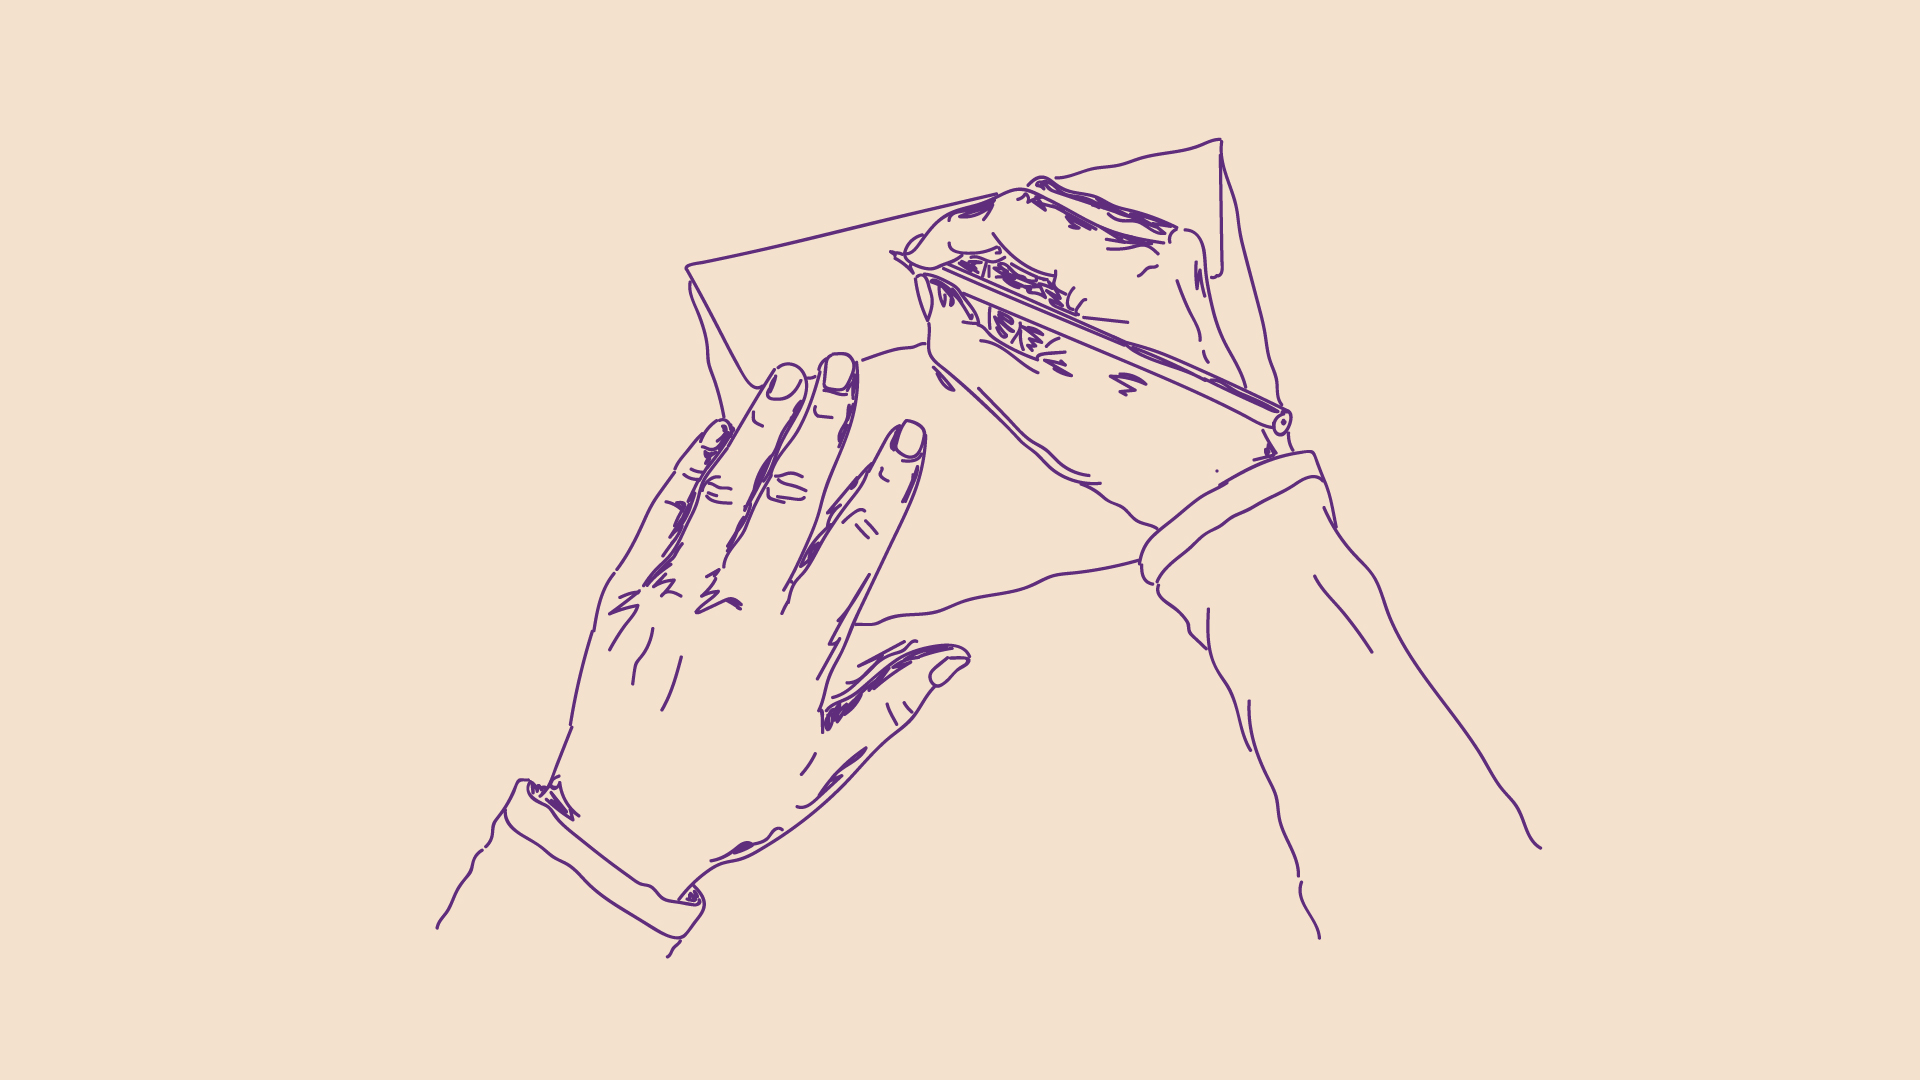 Illustration of two hands. One hand is holding an envelope while the other writes on the back of it.